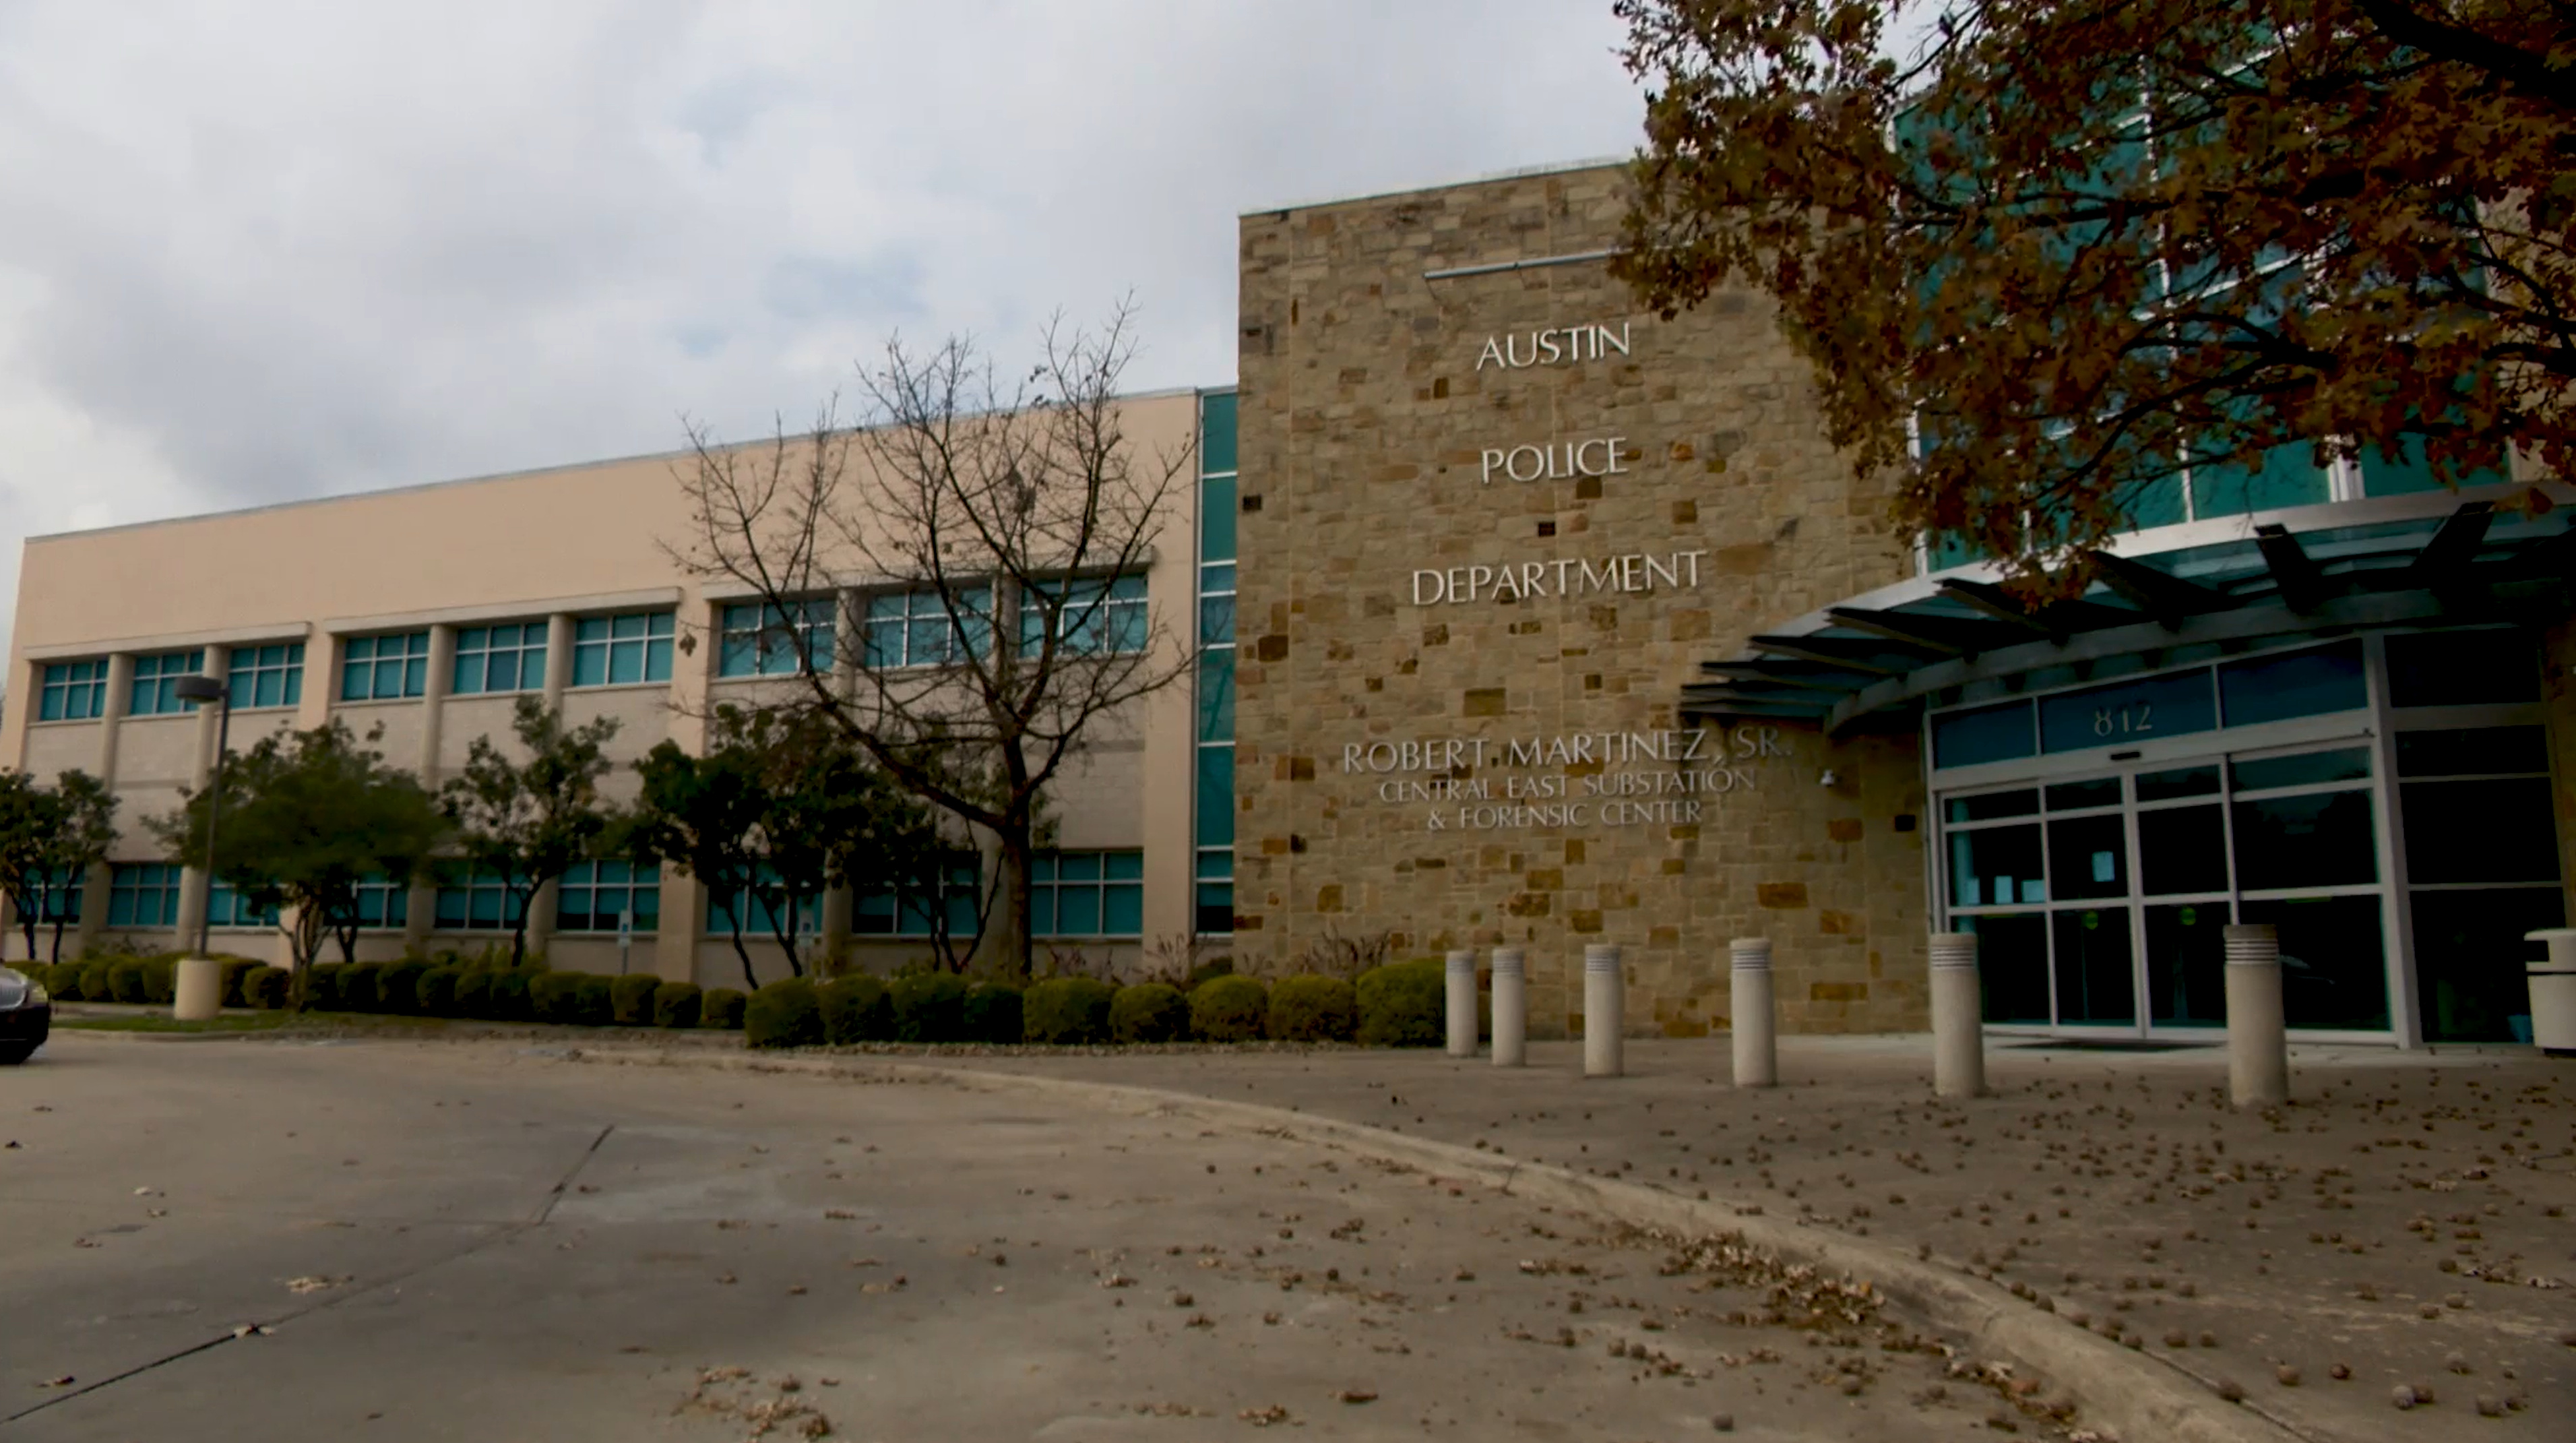 Austin Police Department and forensic center building